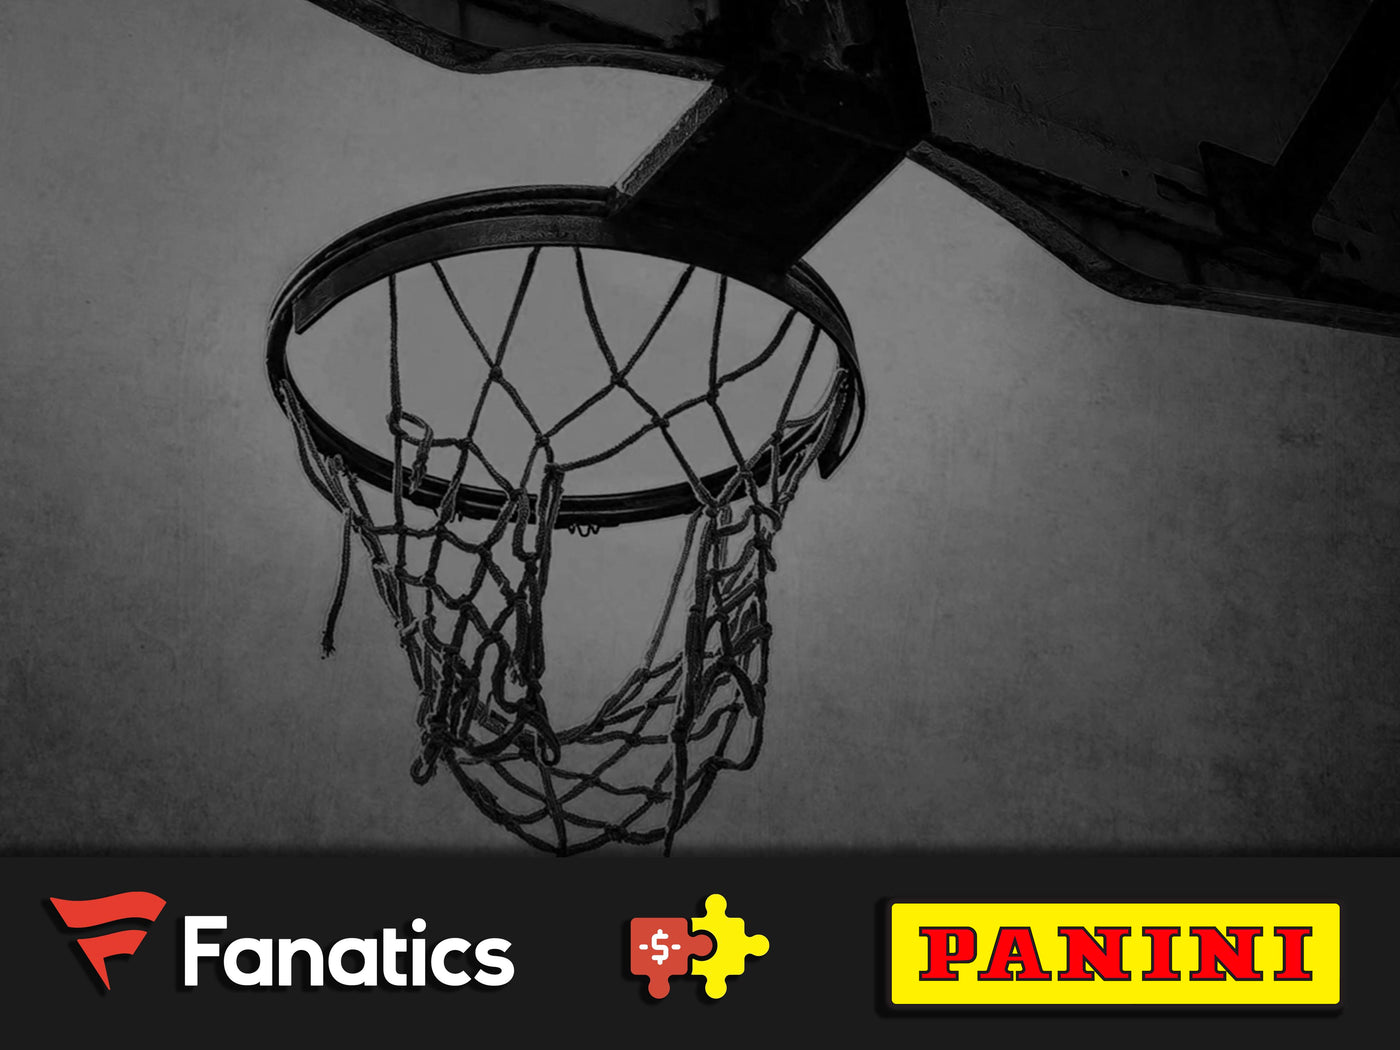 Grayscale image of a basketball rim and net with the Fanatics and Panini logos displayed underneath it